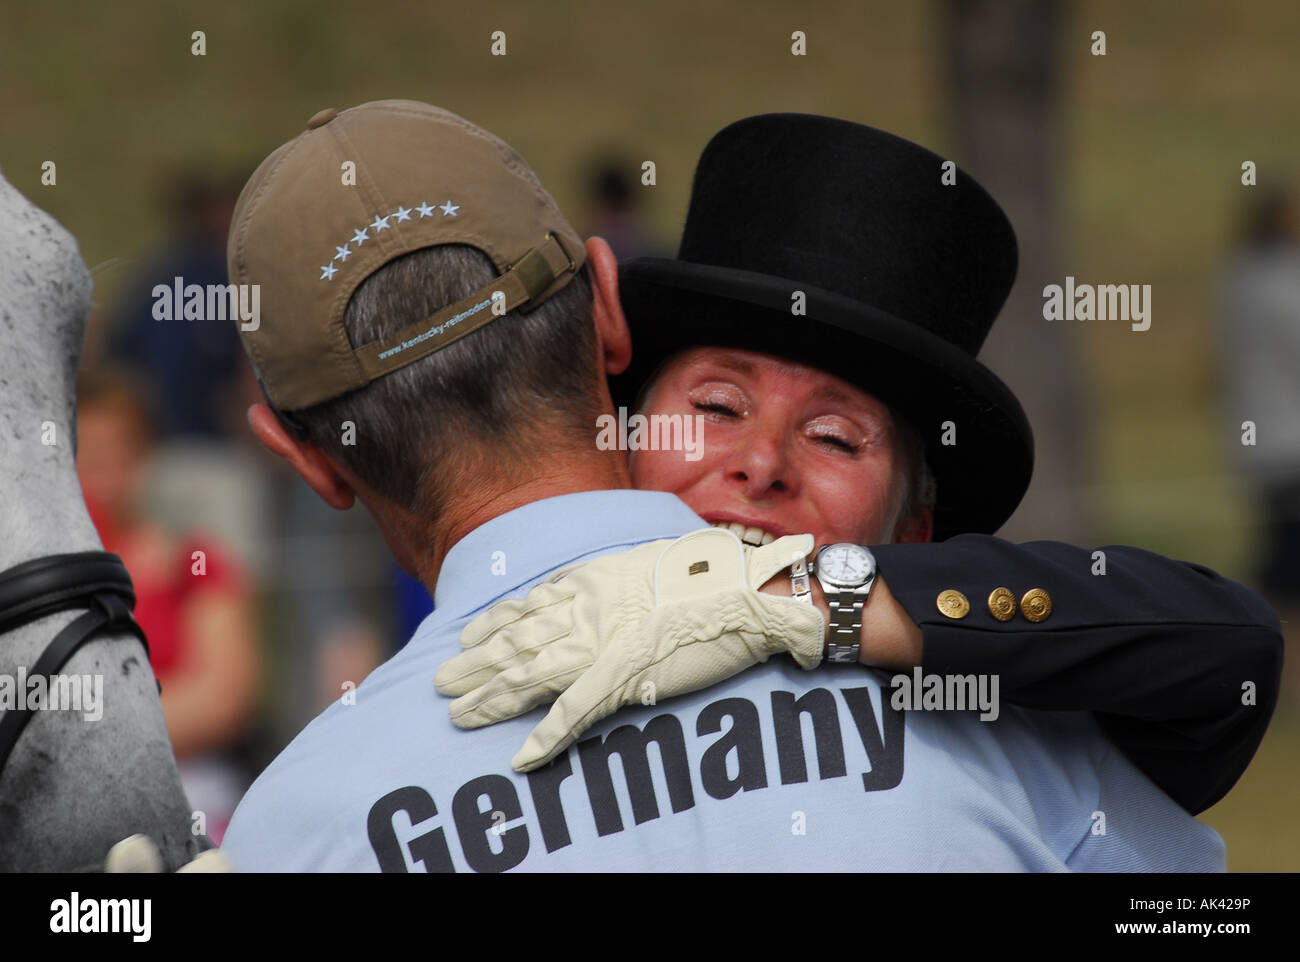 Betina Hoy Celebrating after completing the Dressage test at the 2007 European Eventing Championships in Pratoni , Italy Stock Photo